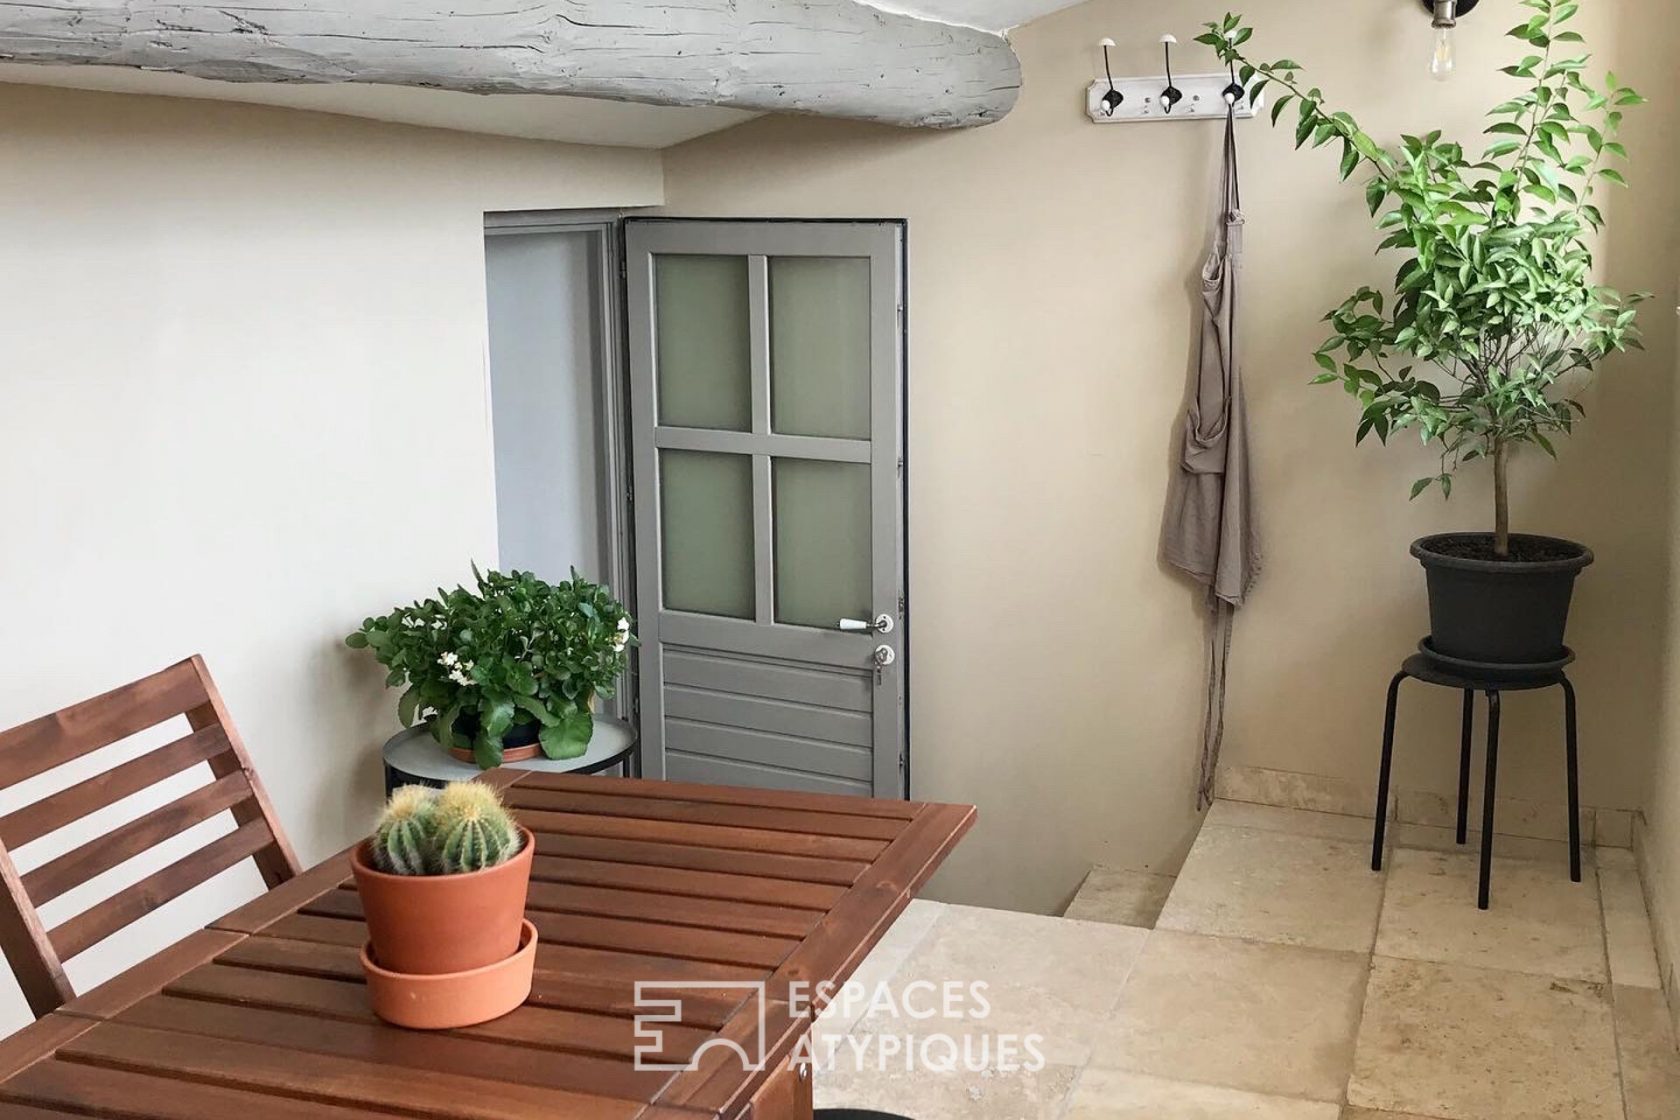 In the heart of Grignan, charming stone village house